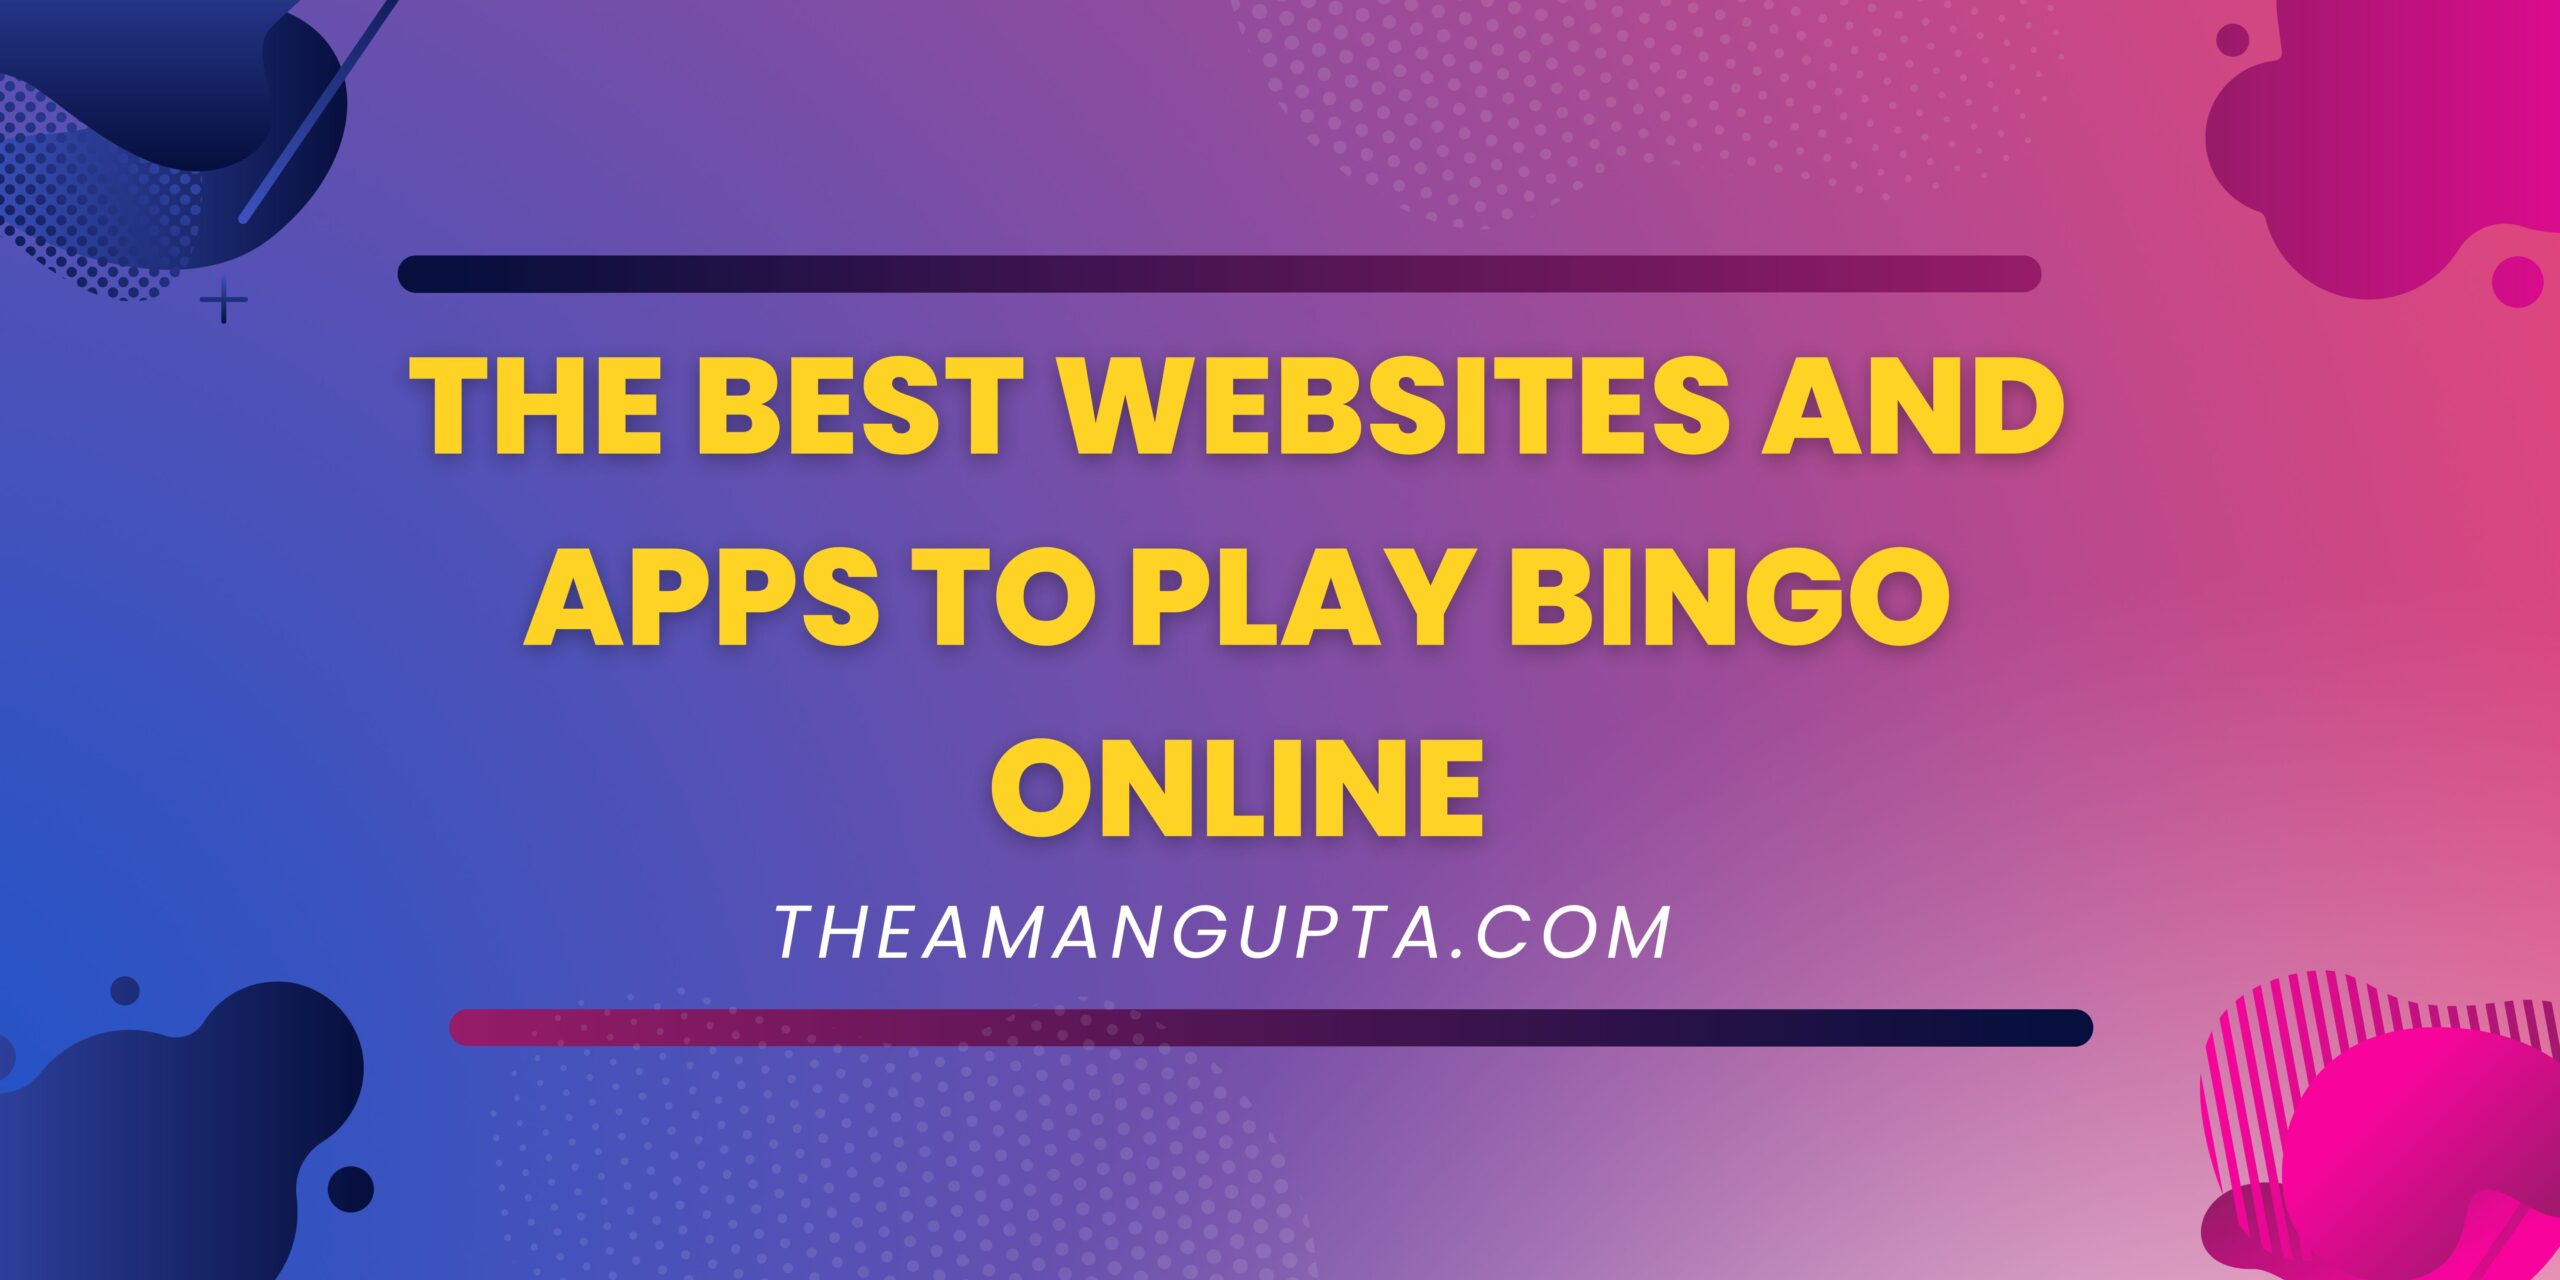 The Best Websites and Apps to Play Bingo Online|Bingo Online|Theamangupta|Theamangupta